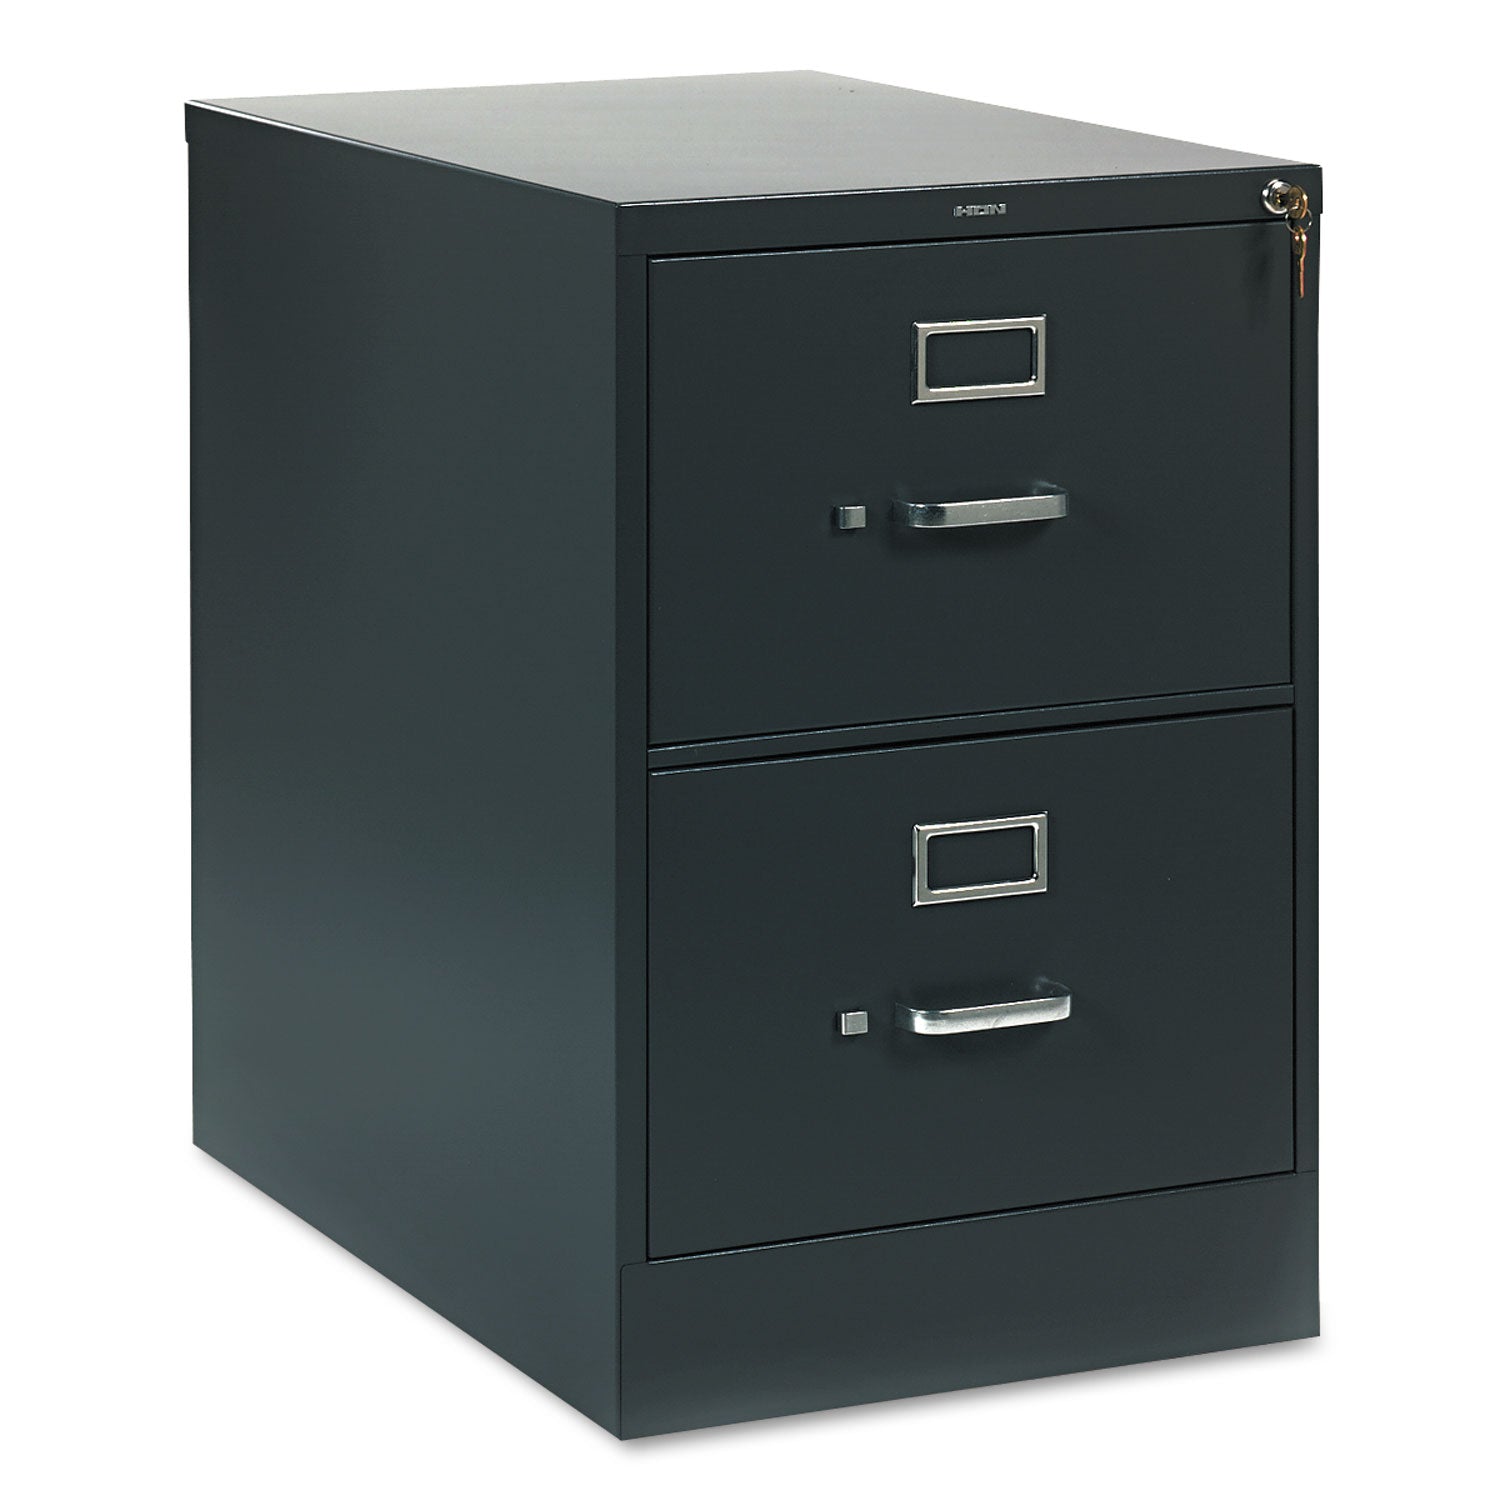 310 Series Vertical File, 2 Legal-Size File Drawers, Charcoal, 18.25" x 26.5" x 29 - 